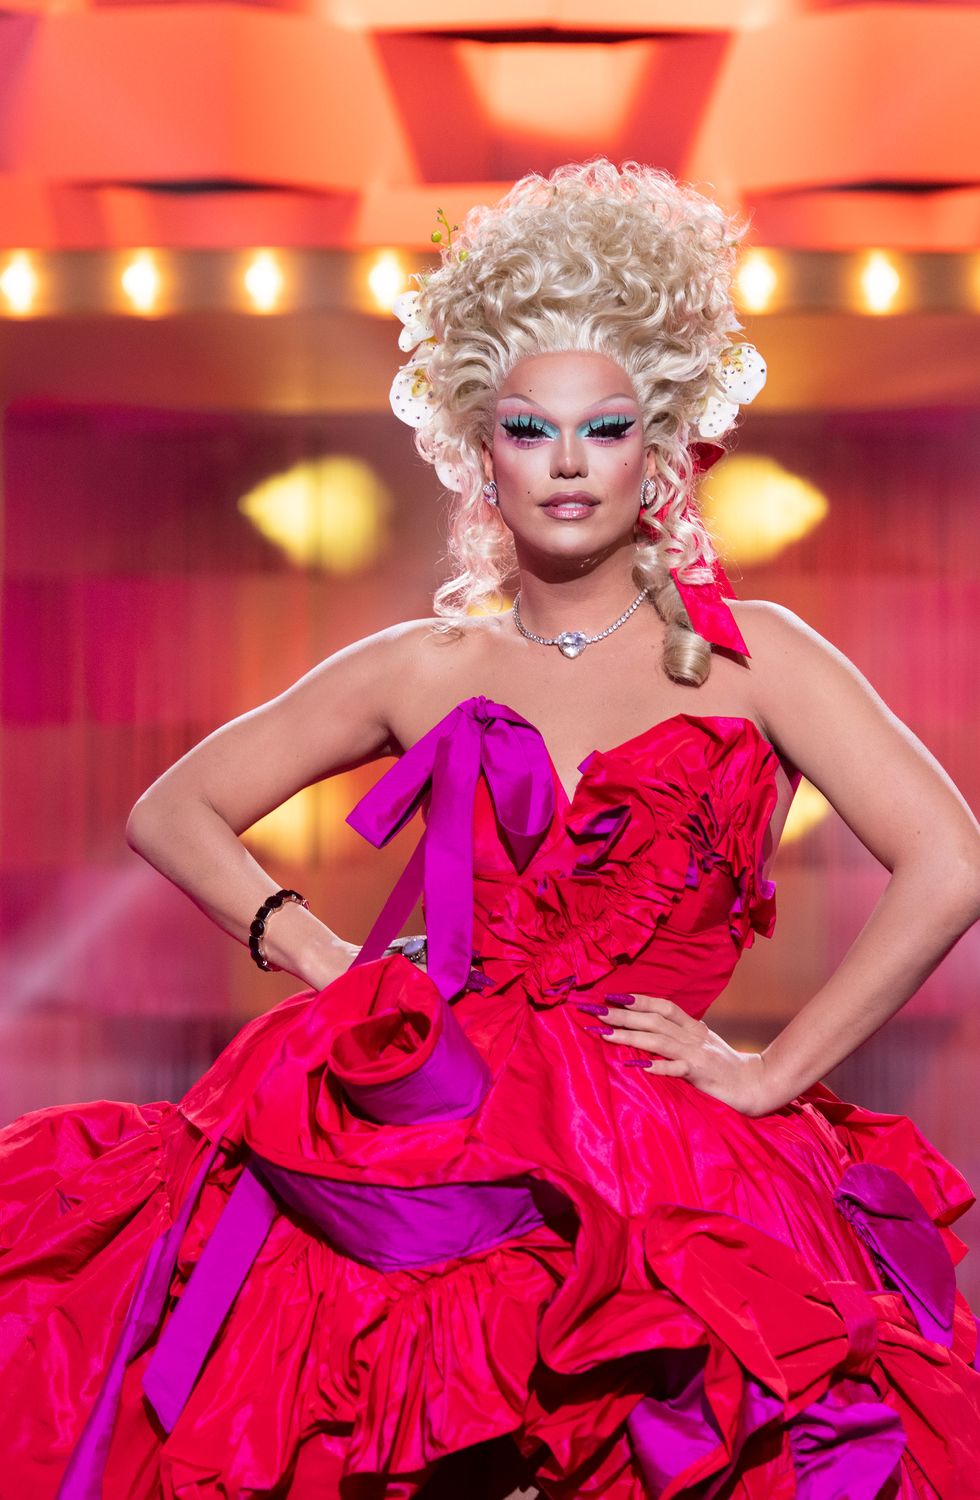 👑 Another World record! Drag Race France Season 2 becomes the